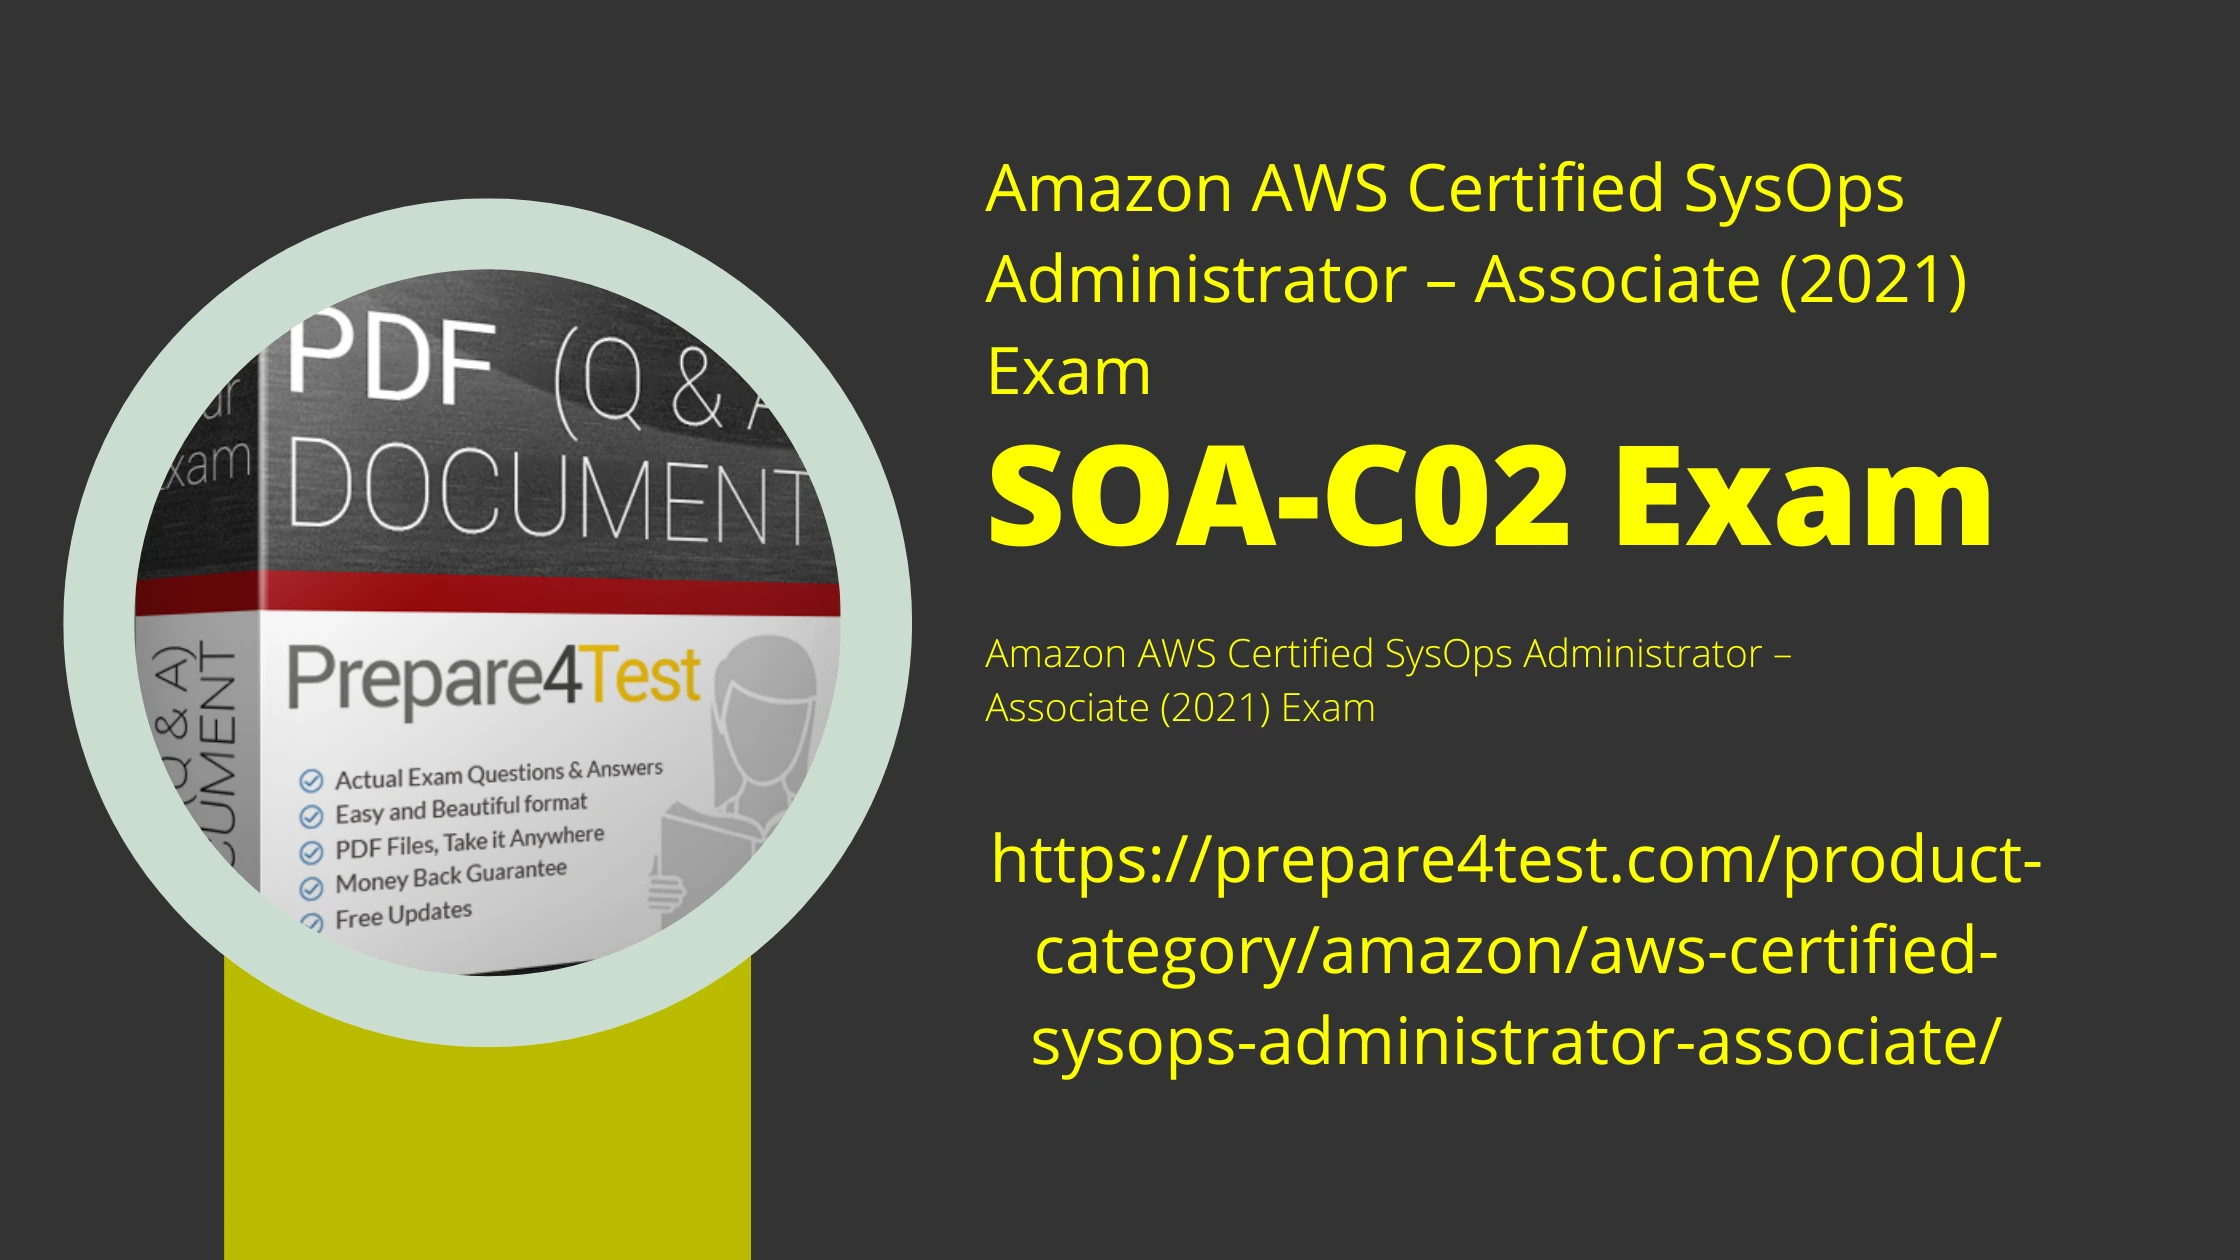 AWS Certified SysOps Administrator Associate Salary promotion